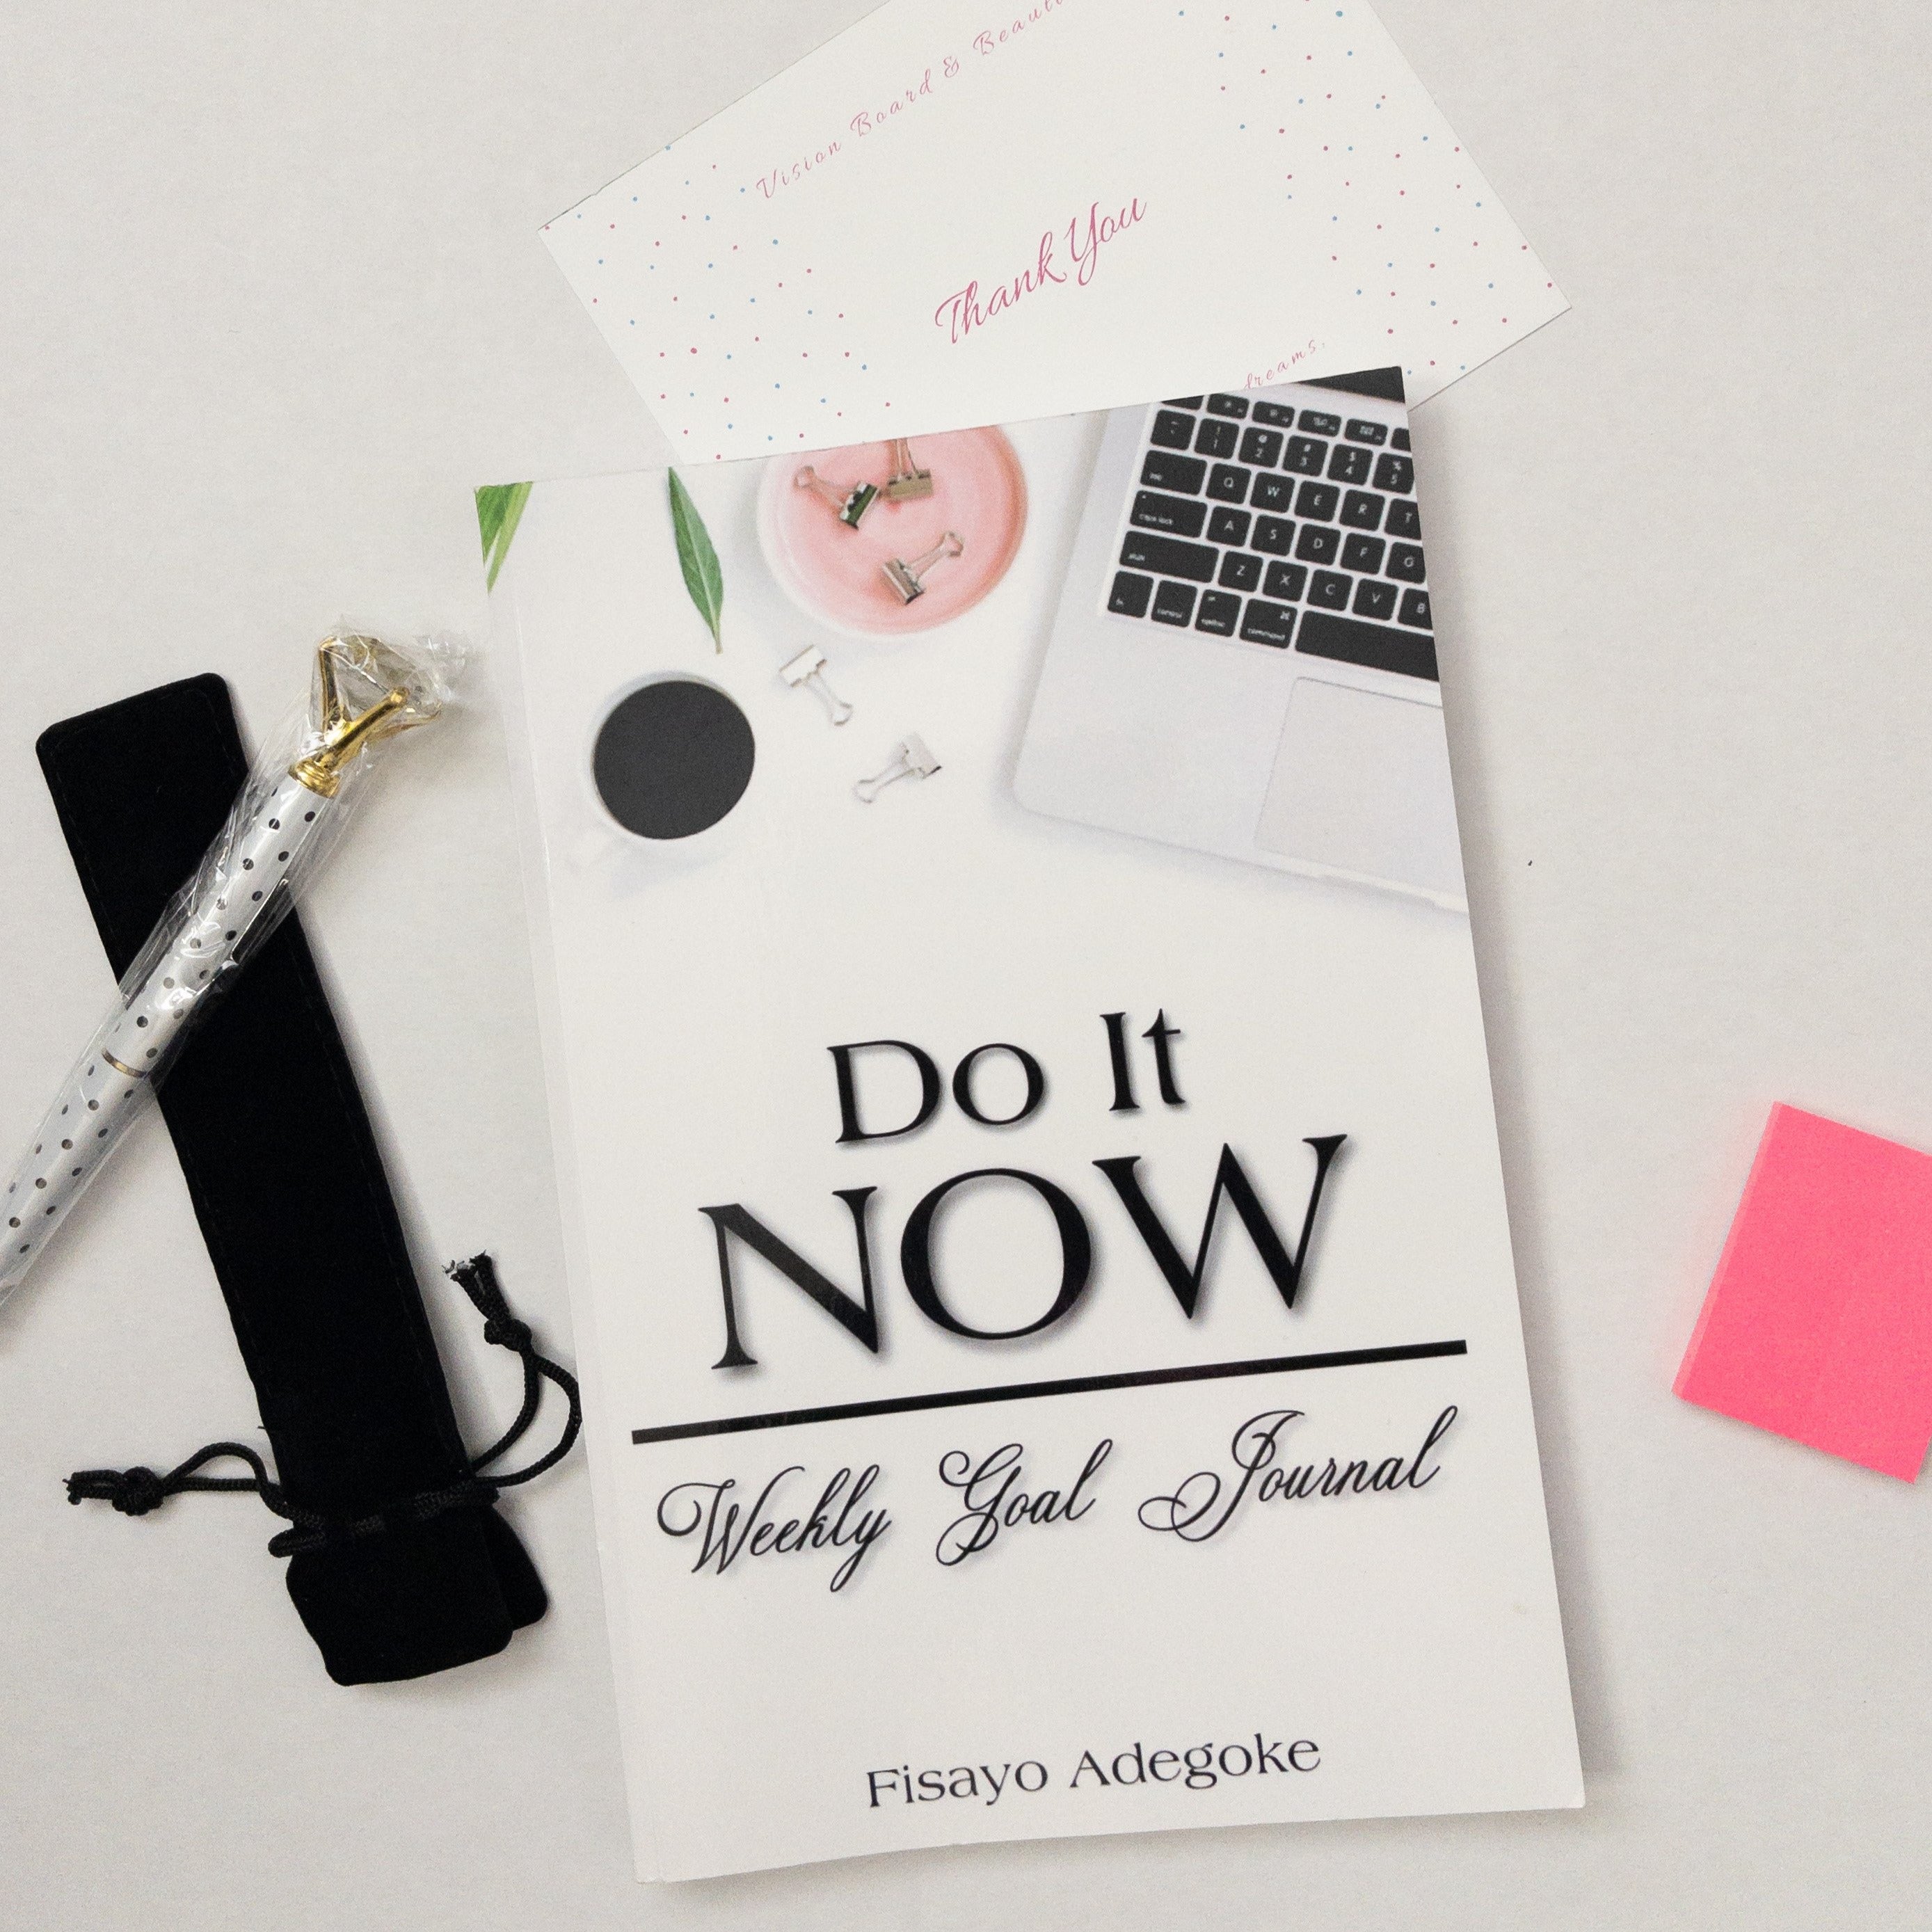 Inside the do it now bundle: the do it now journal, a crown pen, and a magnetic bookmark